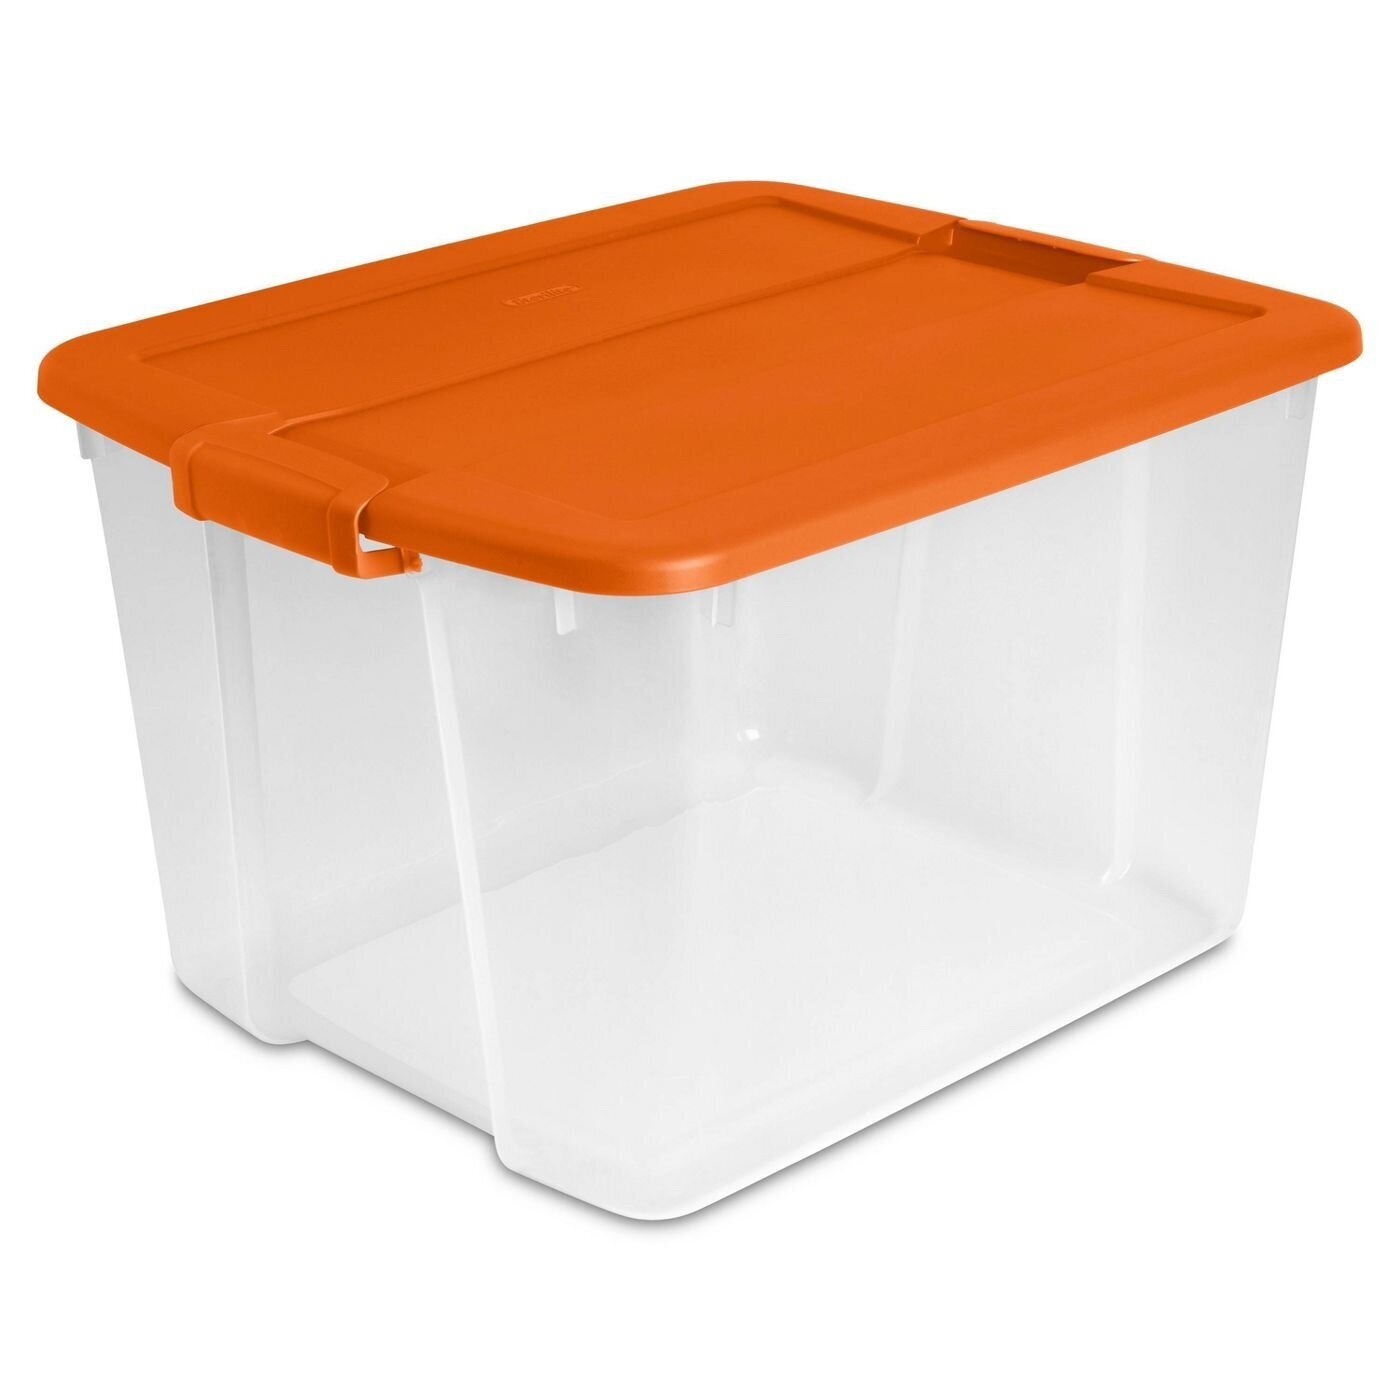 Don’t forget about storage after the holidays. I love these plastic bins with colored lids so you know exactly which one to grab next fall.